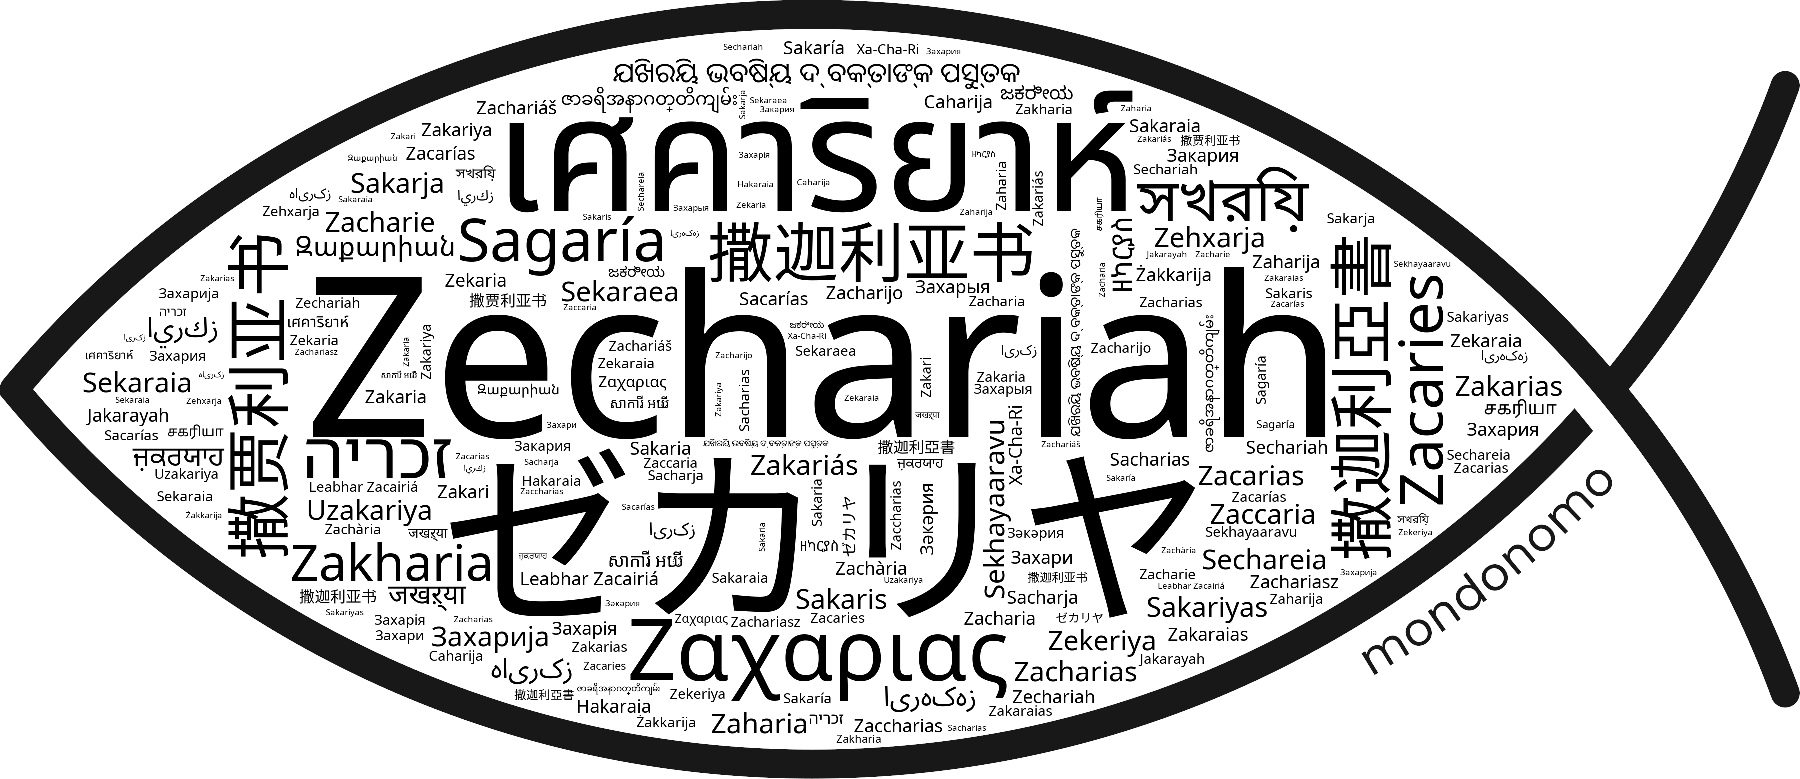 Name Zechariah in the world's Bibles